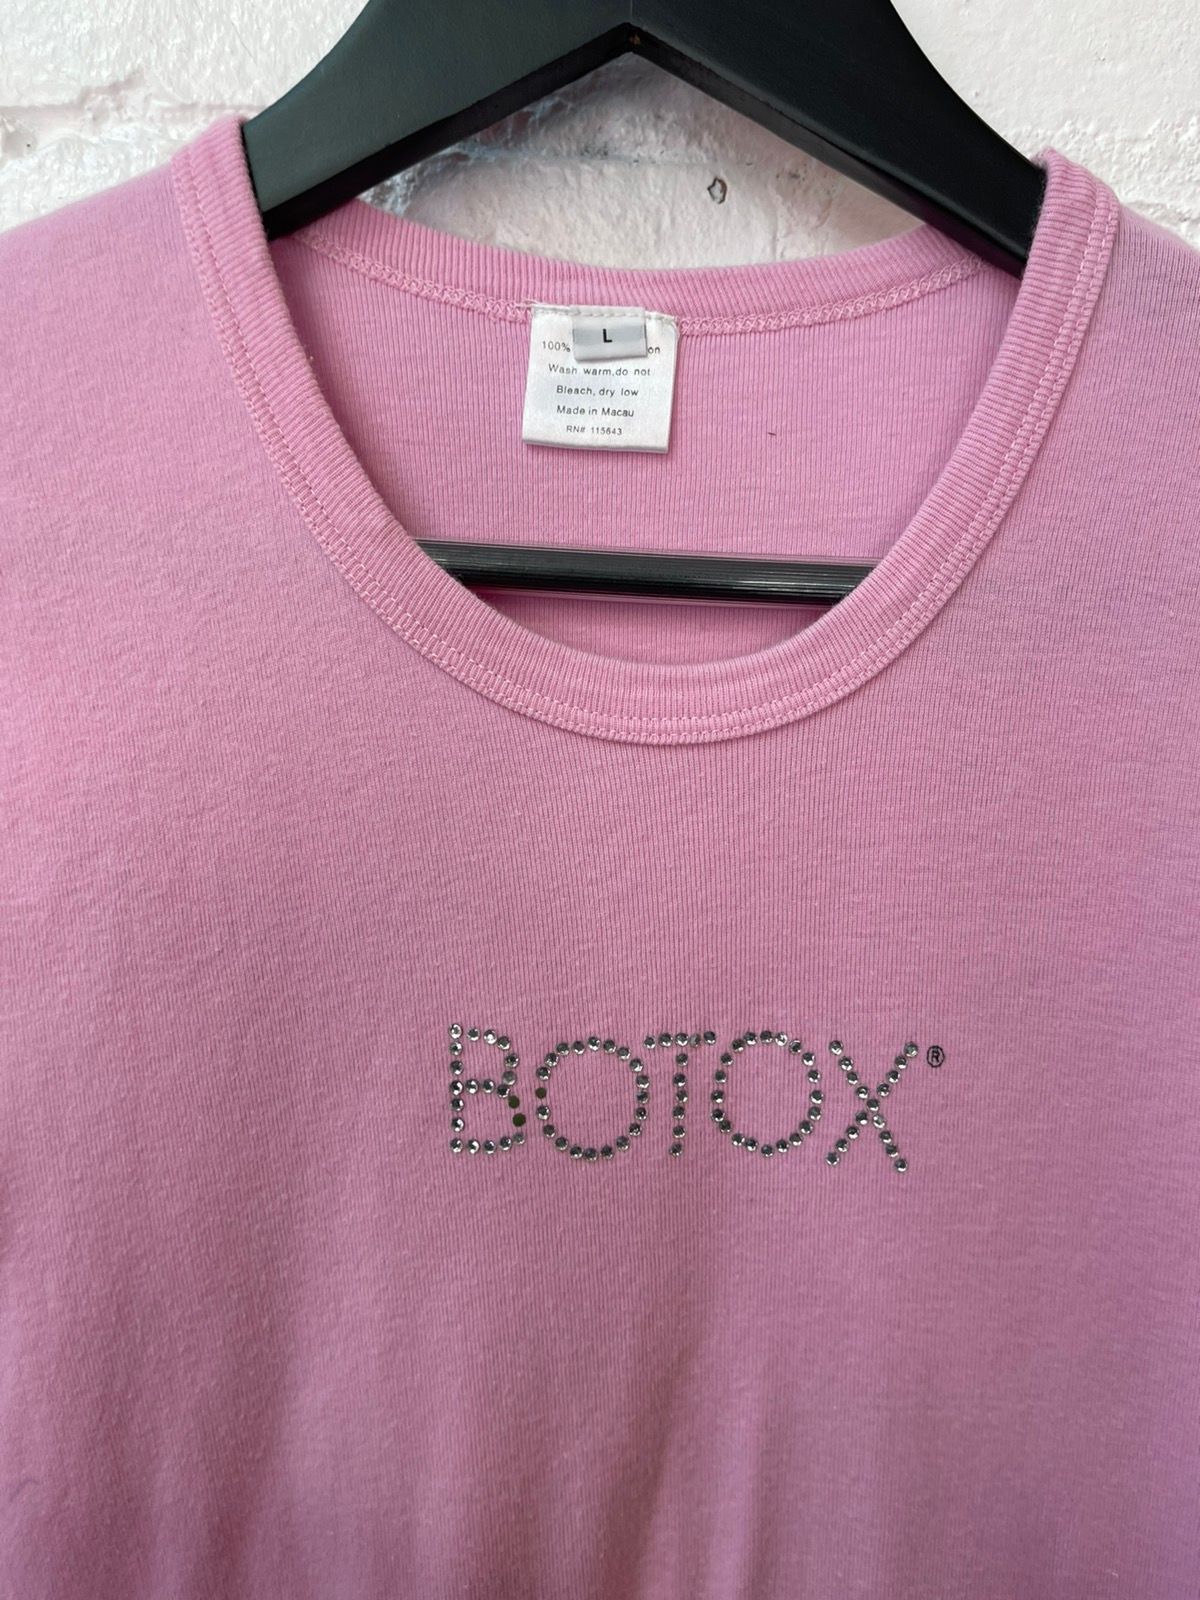 Vintage BOTOX Crystal Bedazzled RX Drug Shirt XS or S